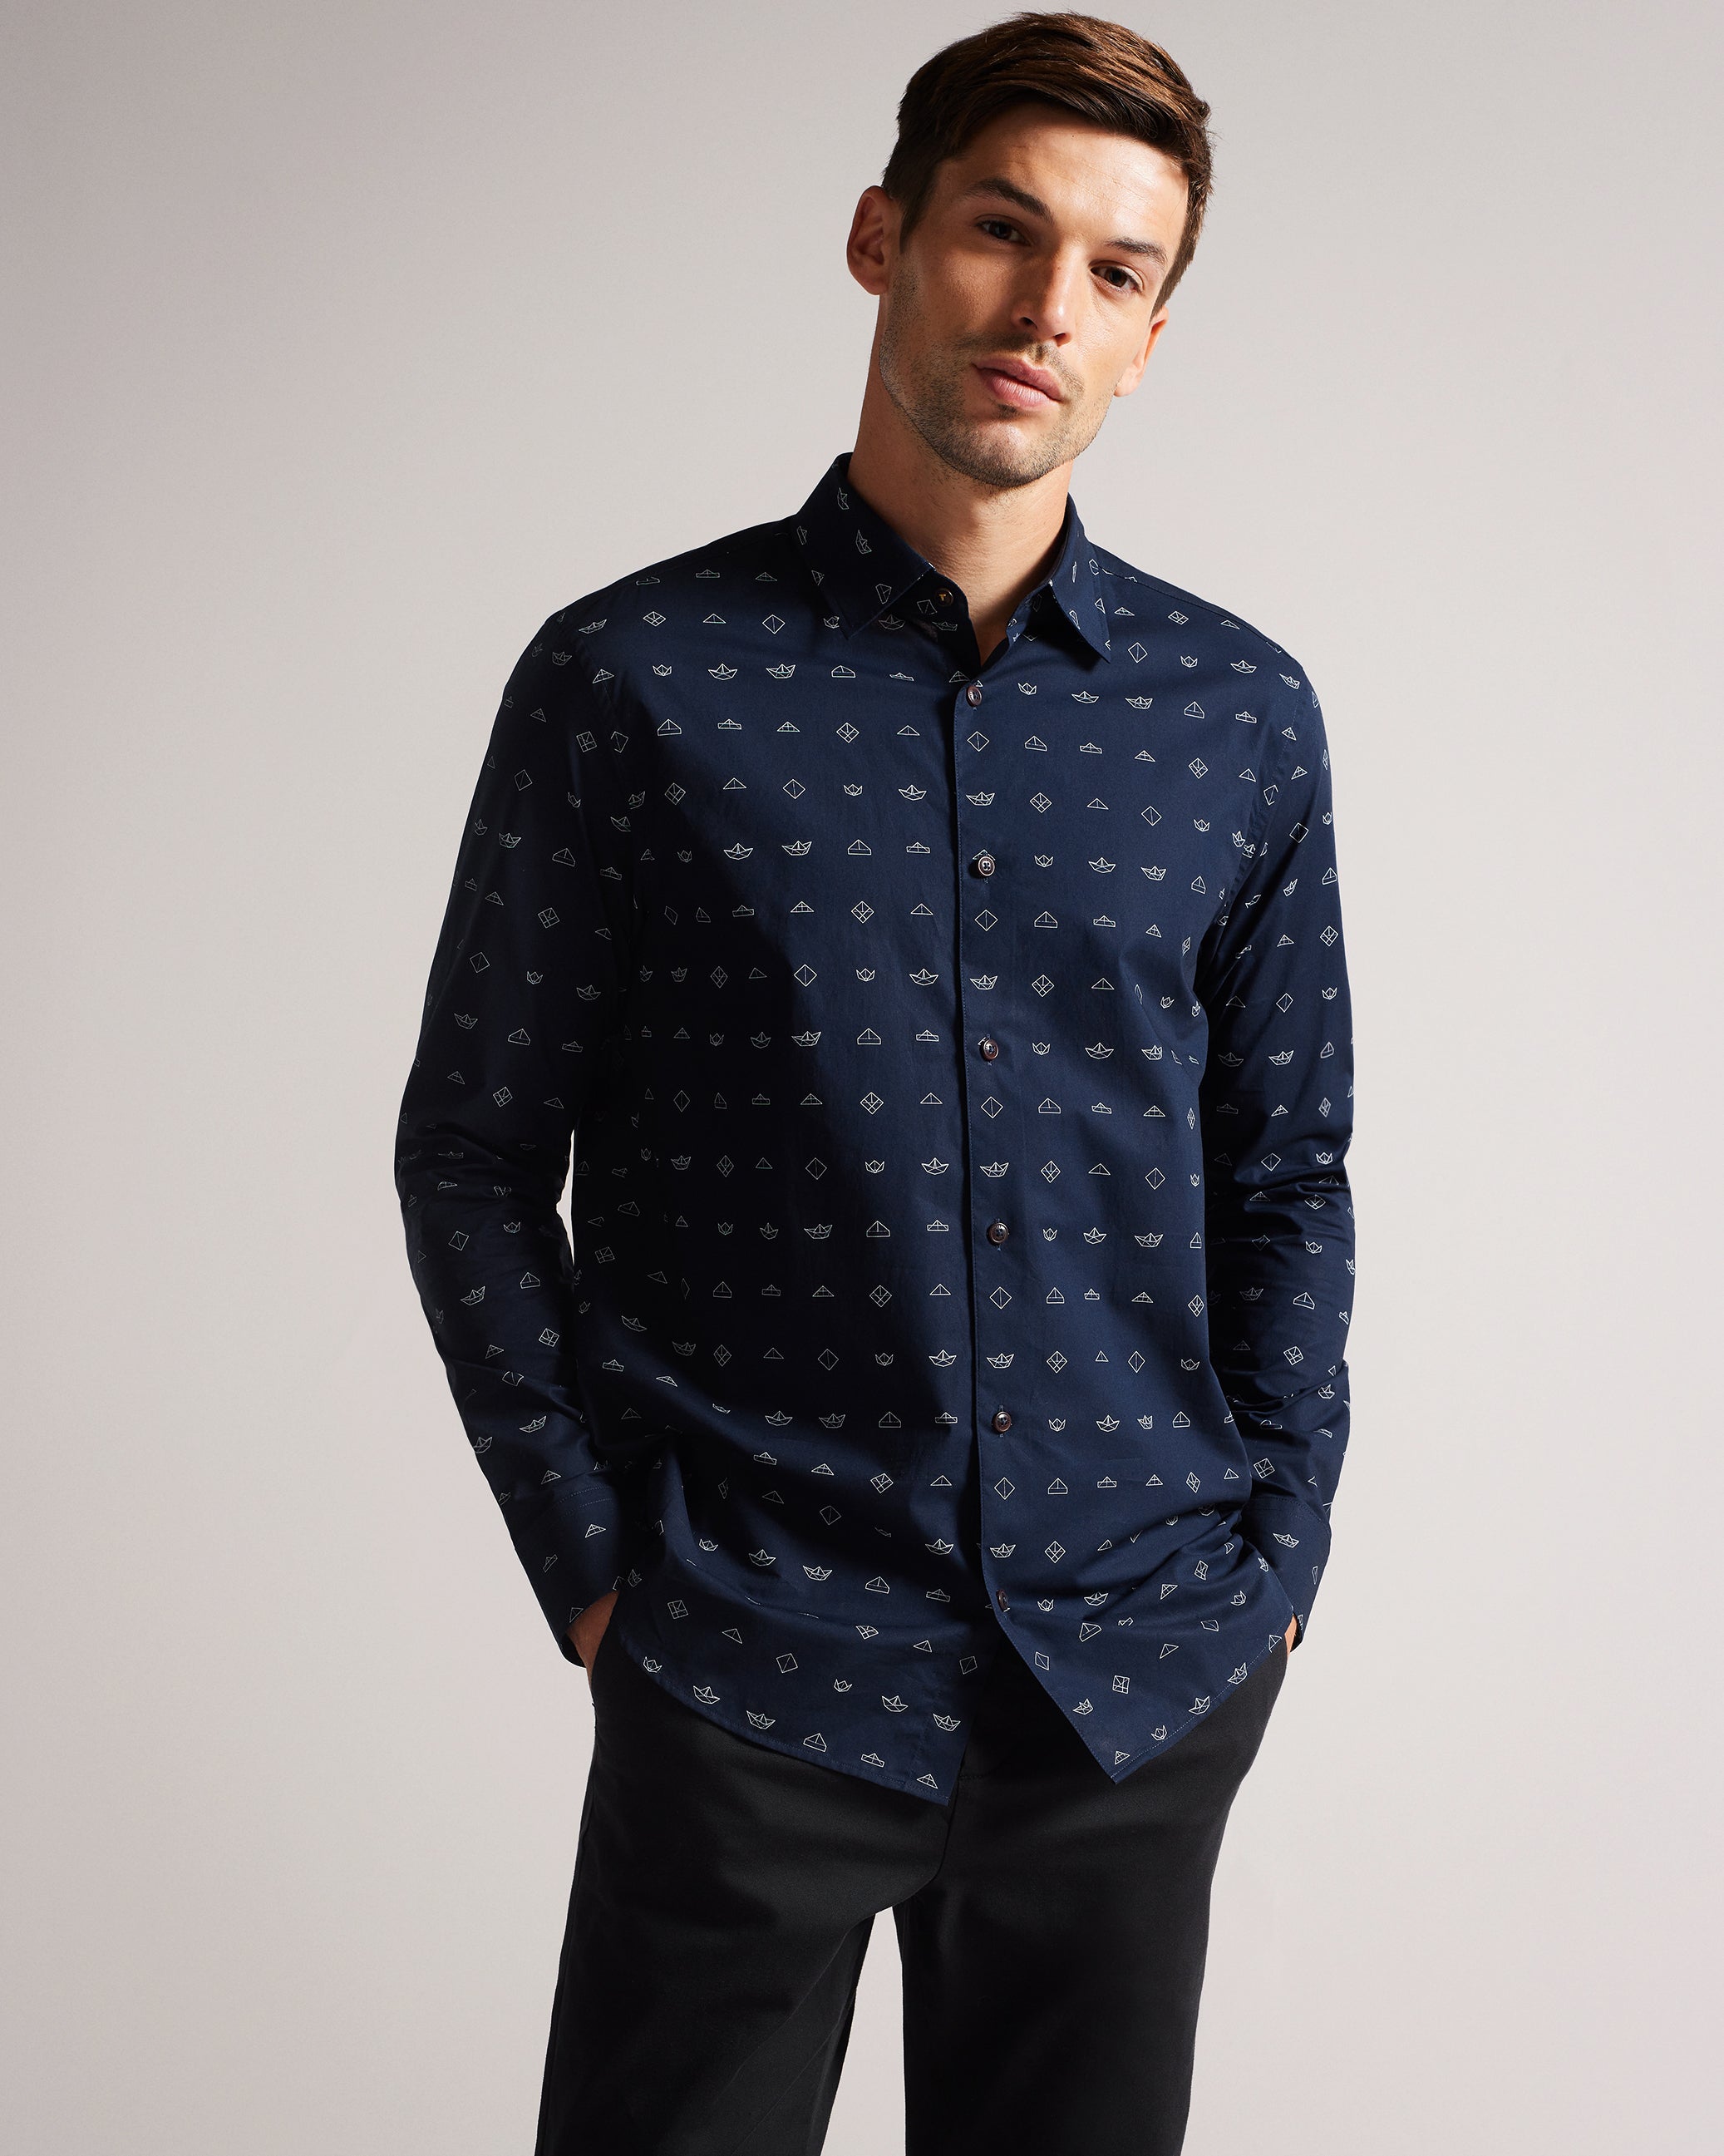 WITLY - LS Paper Boat Print Shirt – Ted Baker, United States